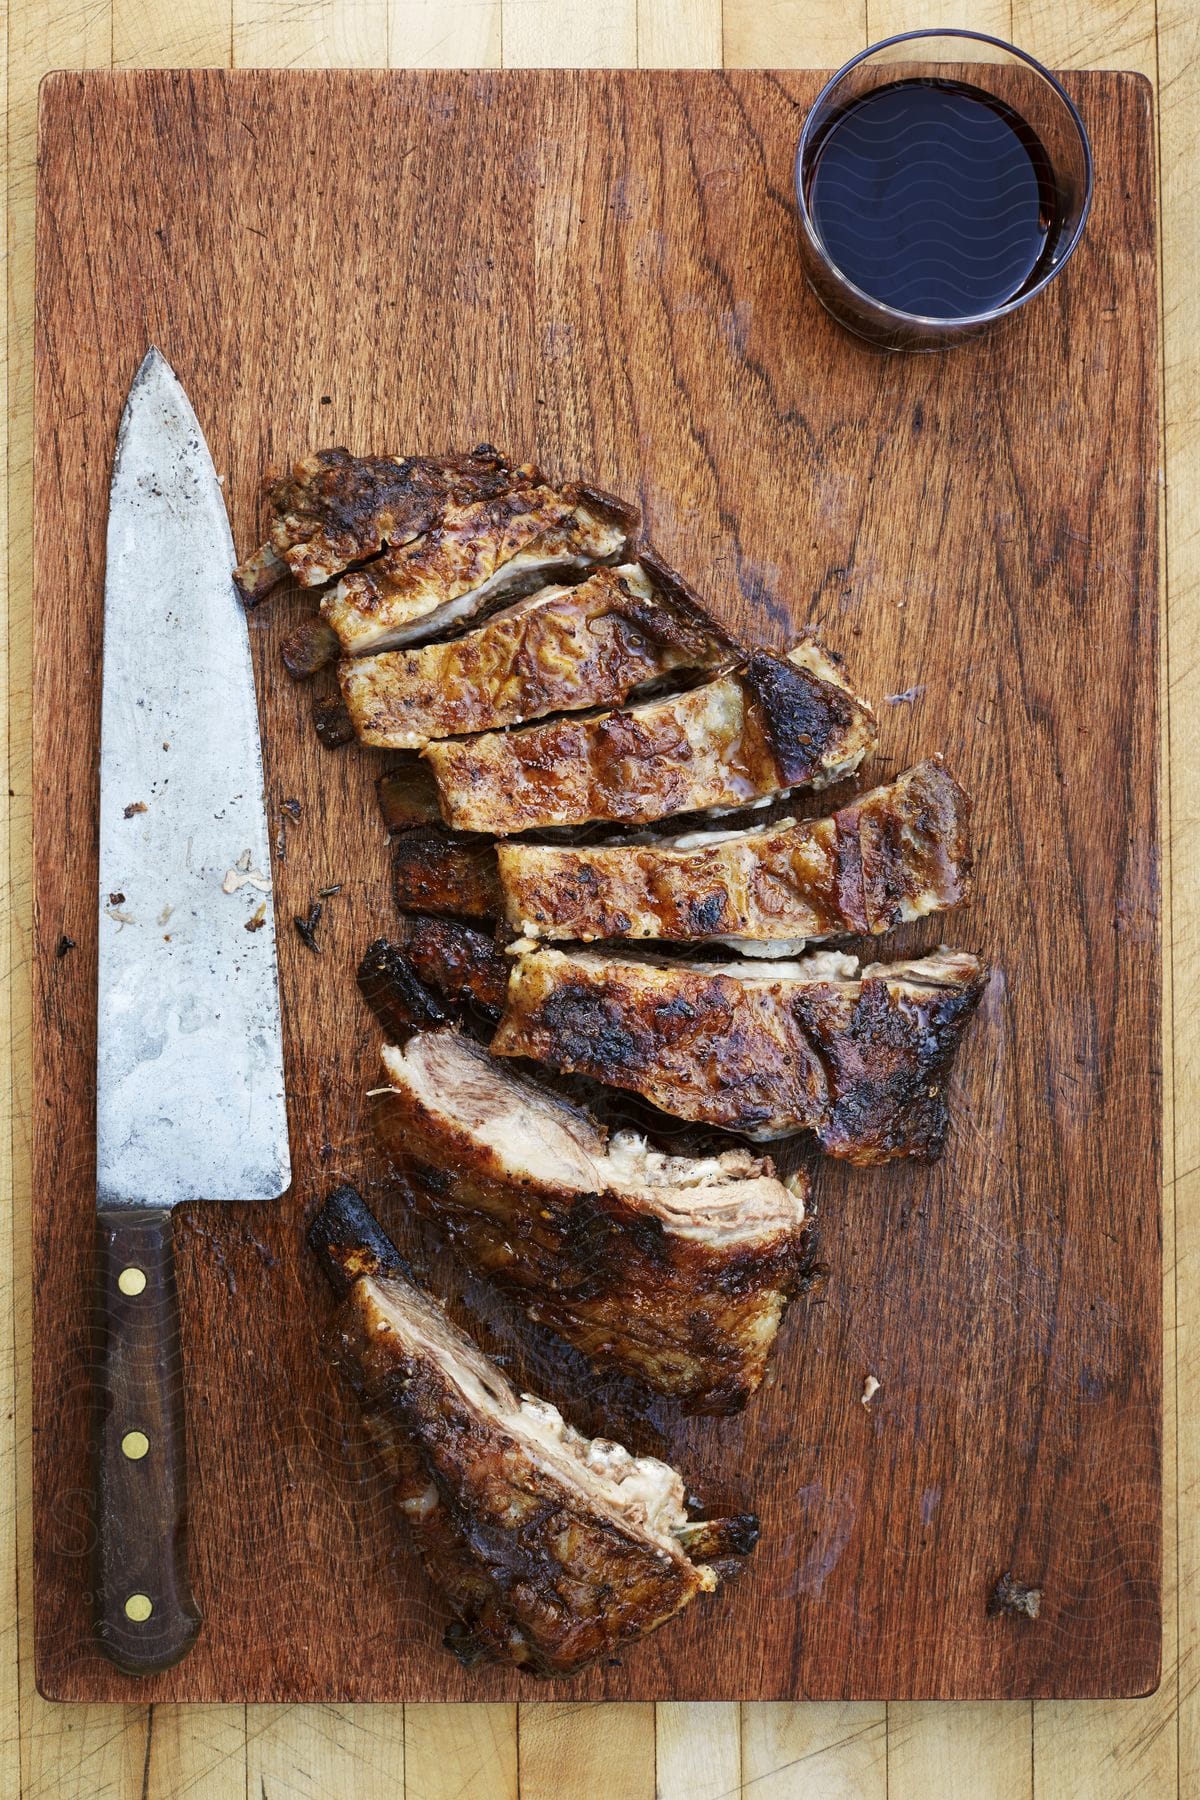 Cooked meat strips on wooden cutting board with knife and glass of wine